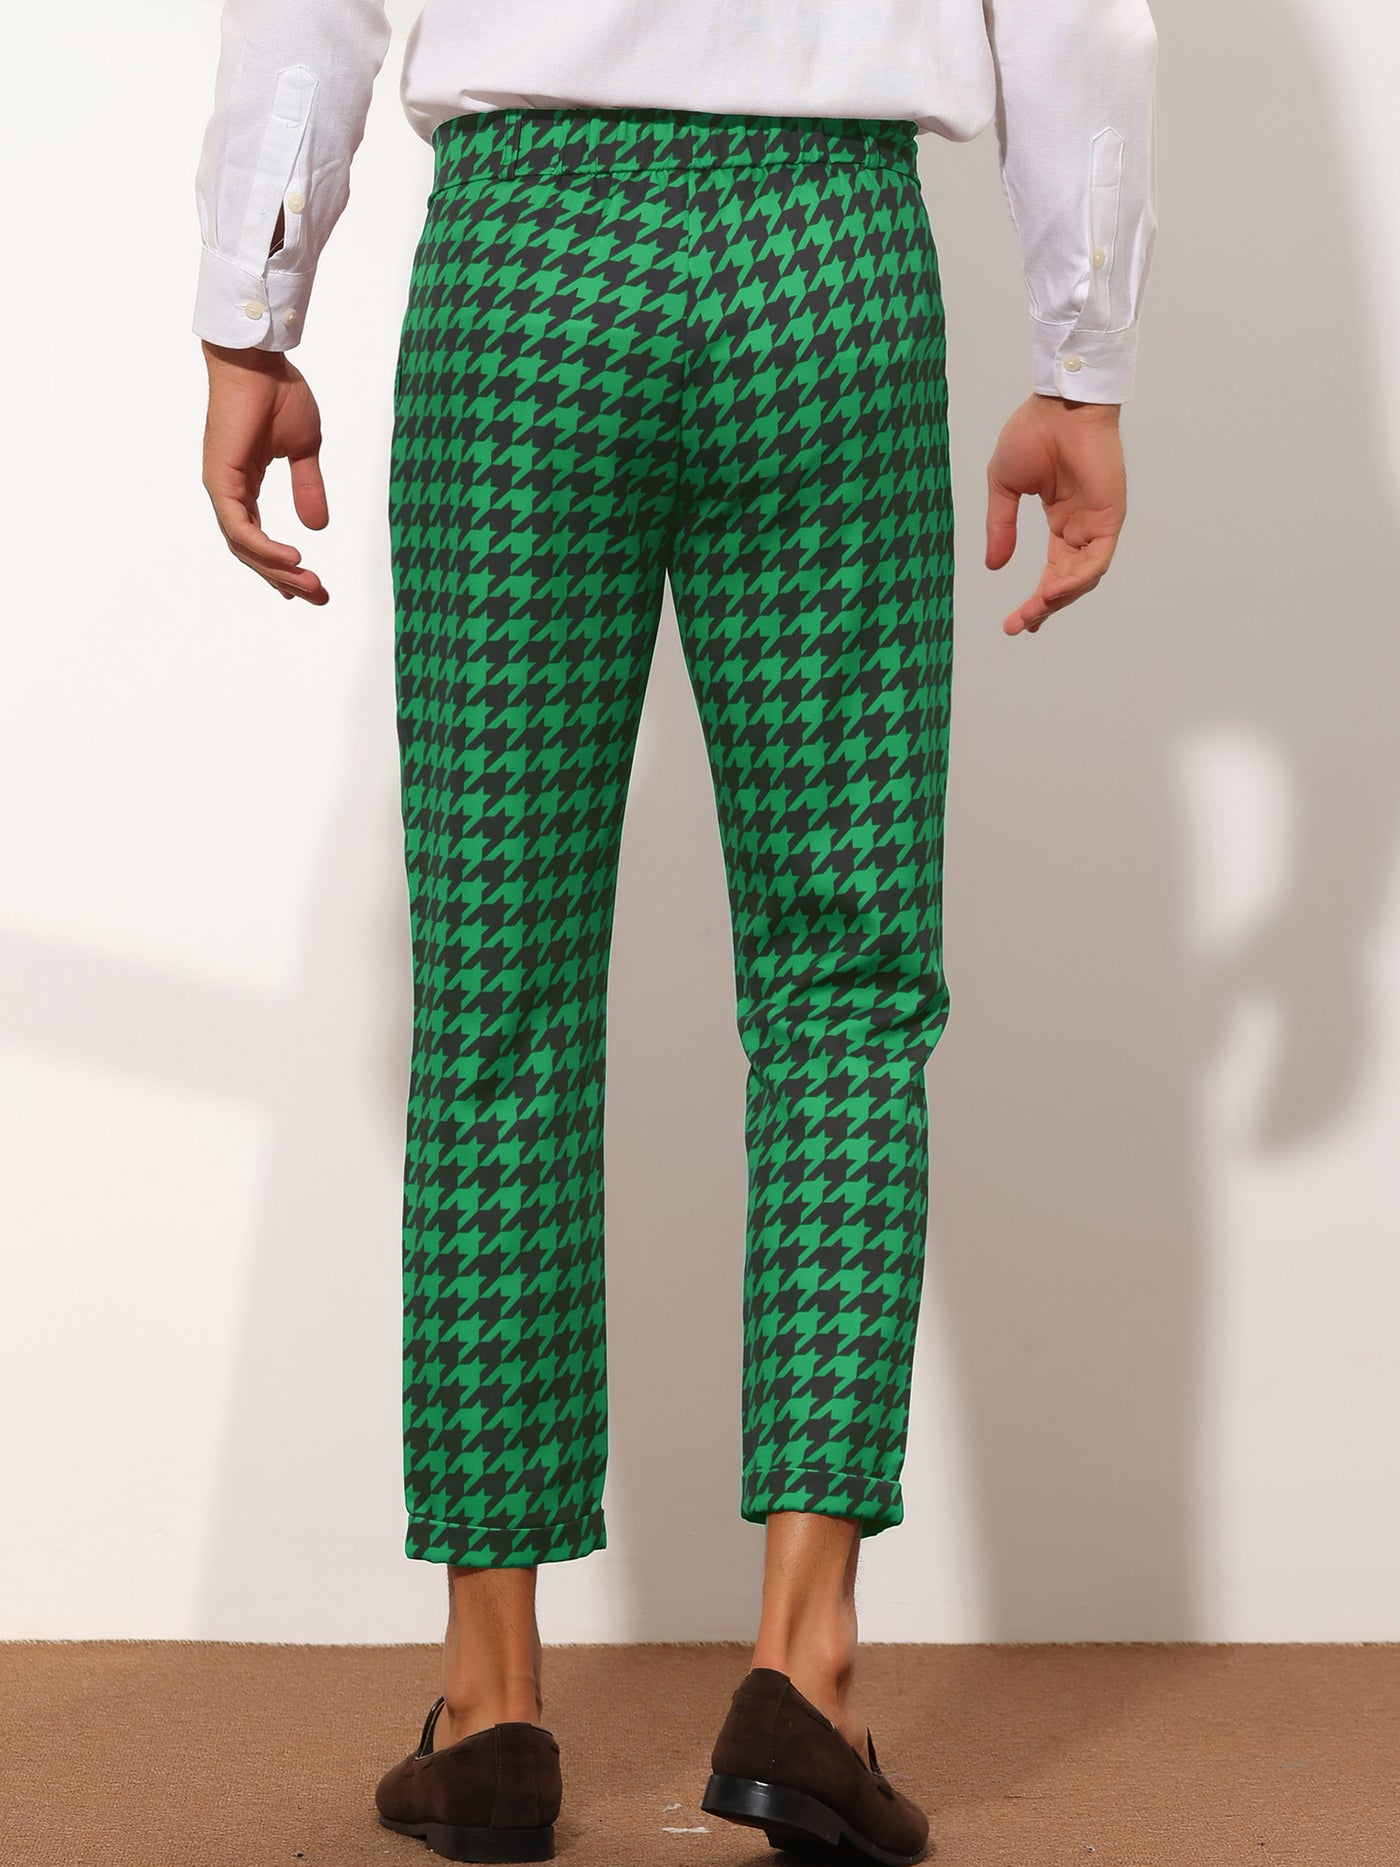 Bublédon Men's Plaid Slim Fit Houndstooth Checked Cropped Dress Pants